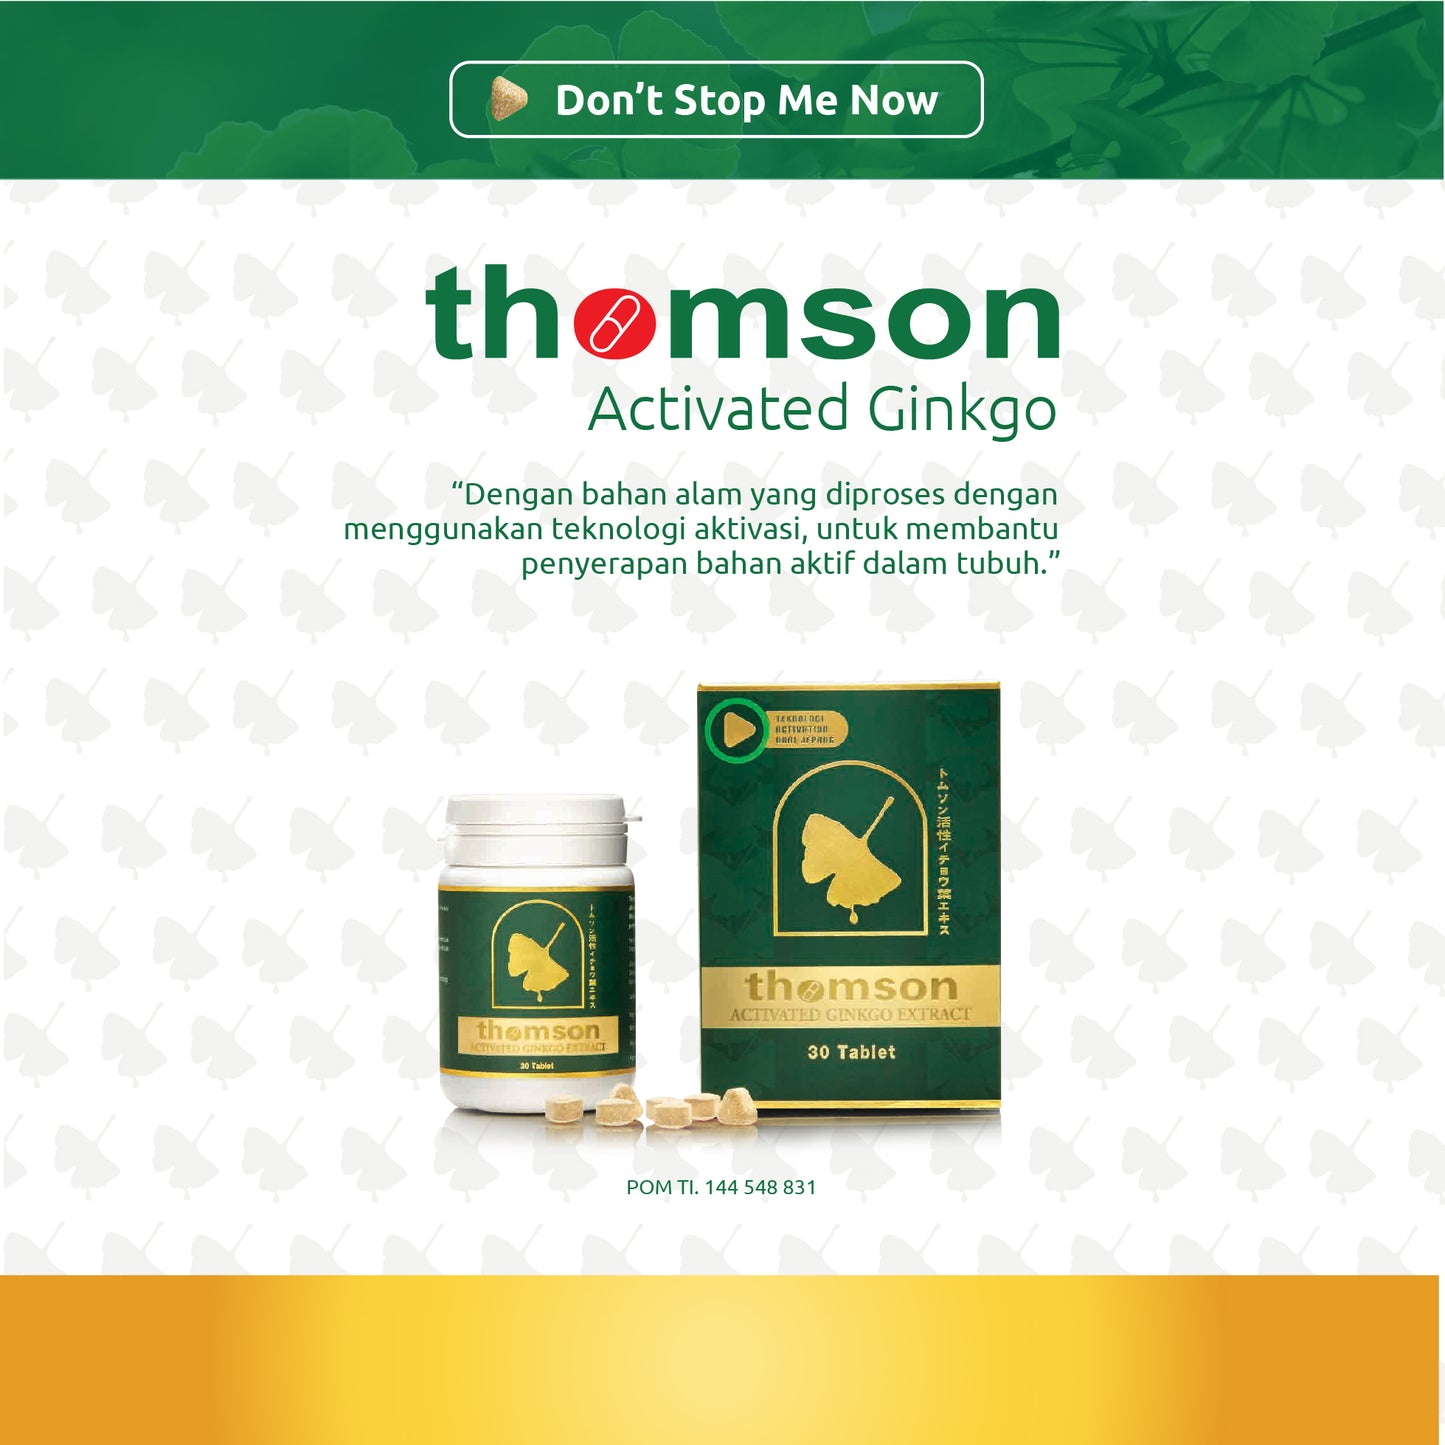 Thomson Activated Ginkgo